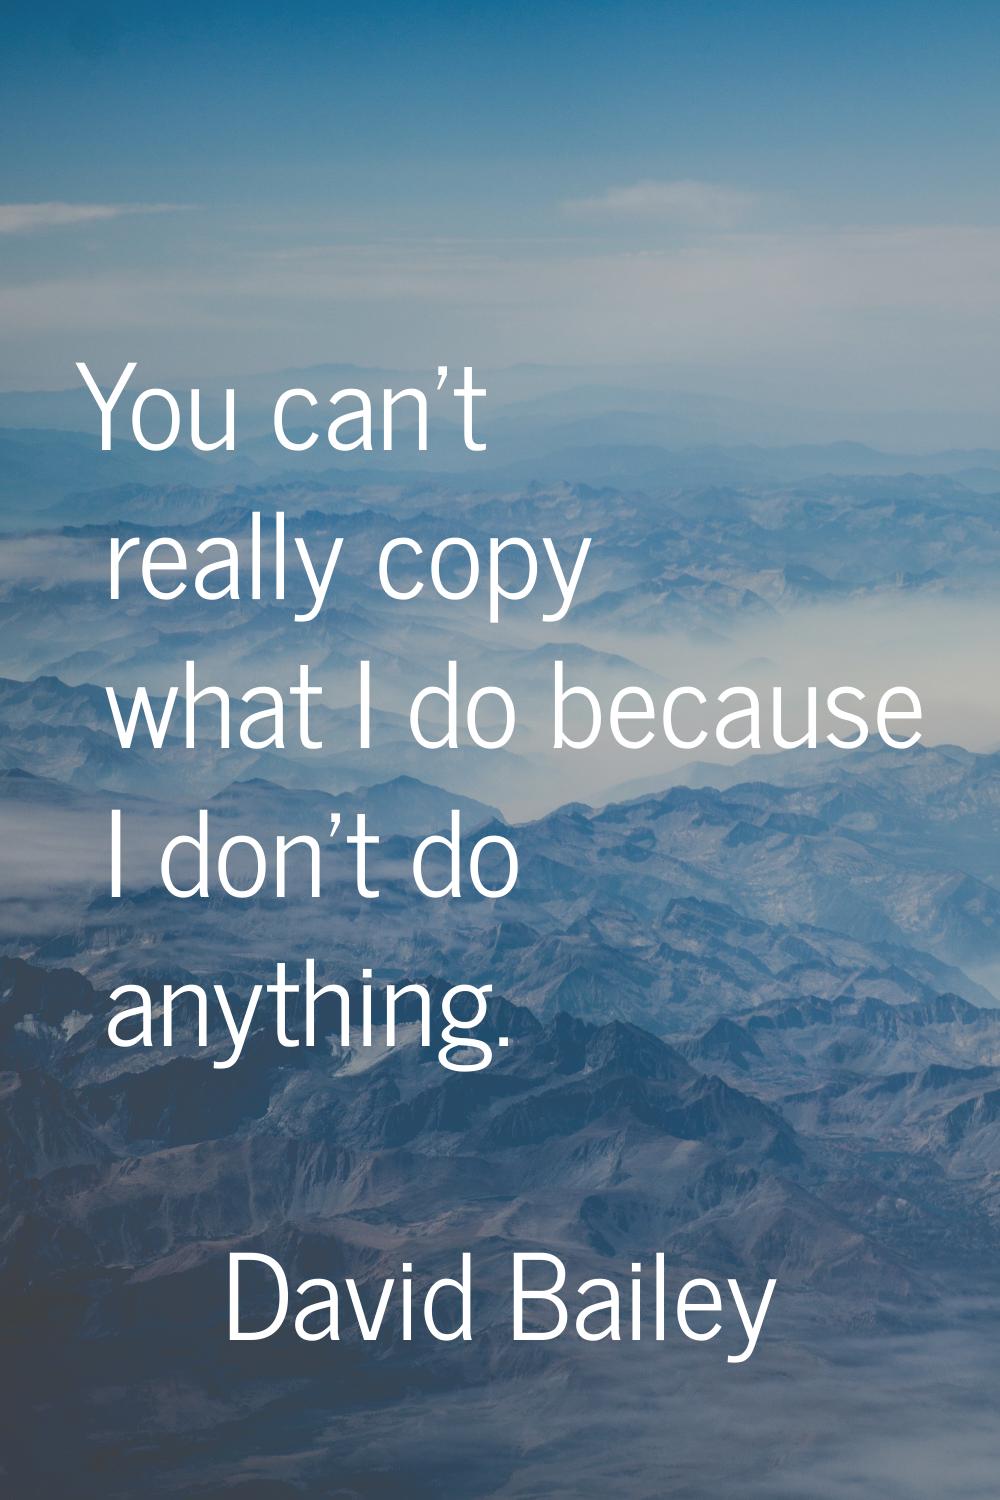 You can't really copy what I do because I don't do anything.